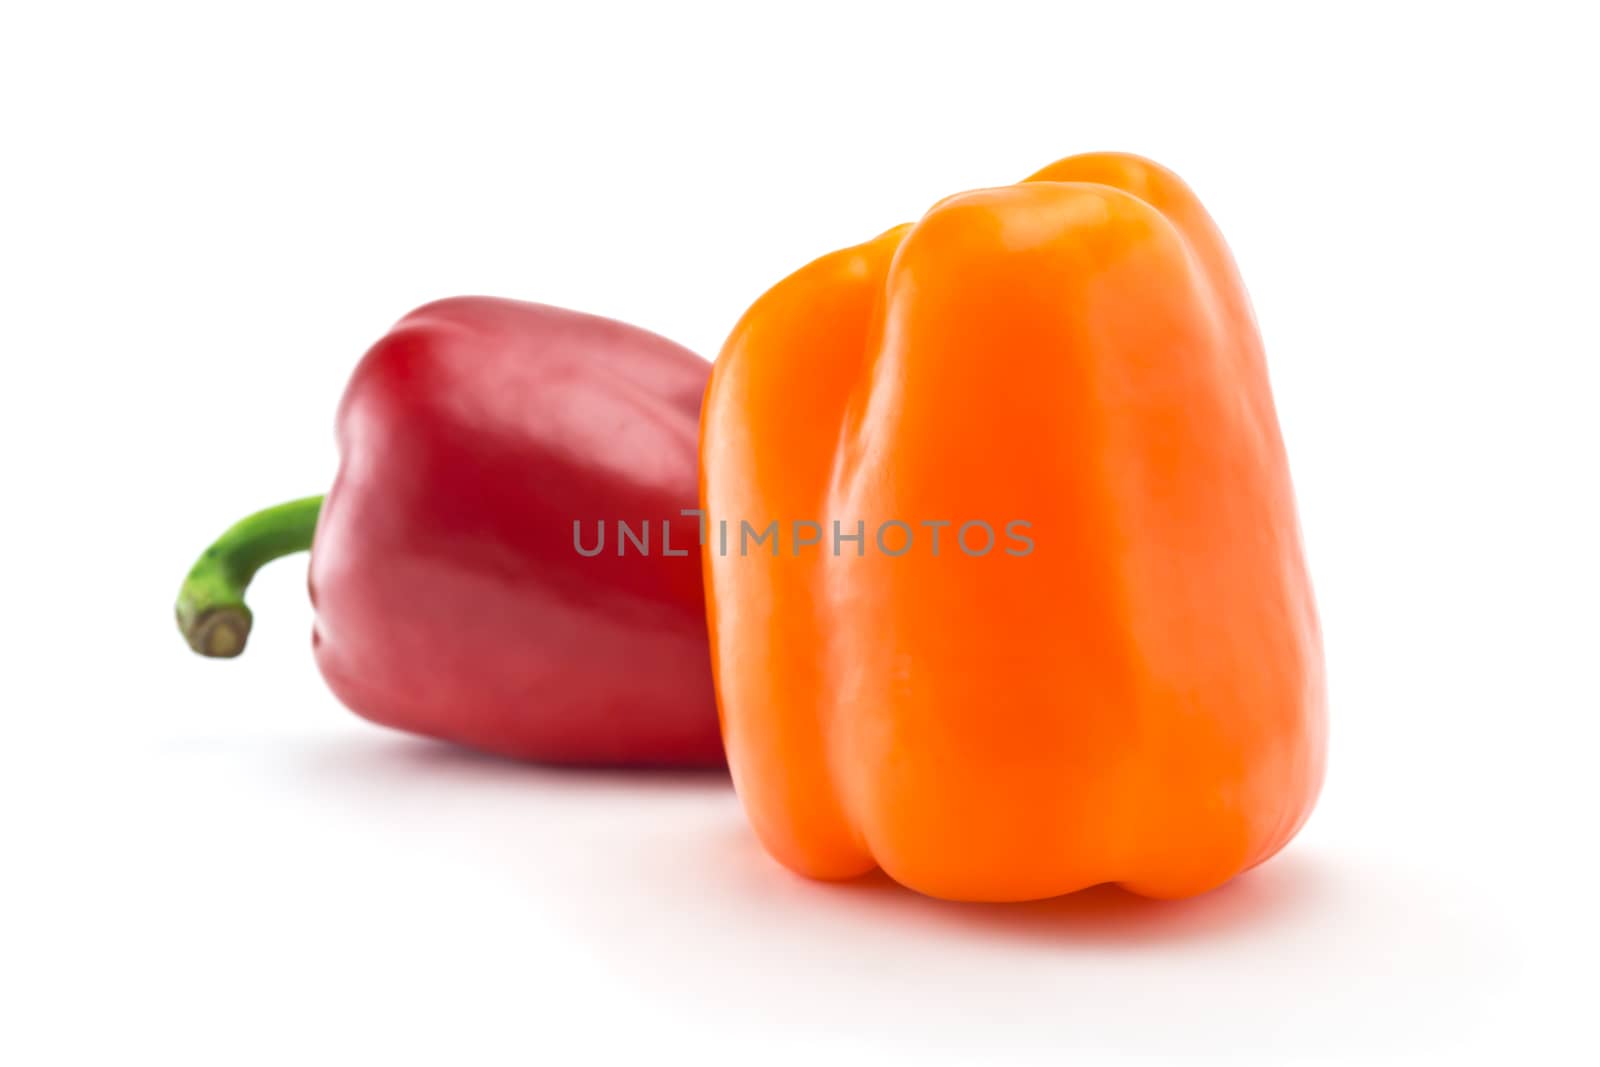 Two juicy peppers on a white background